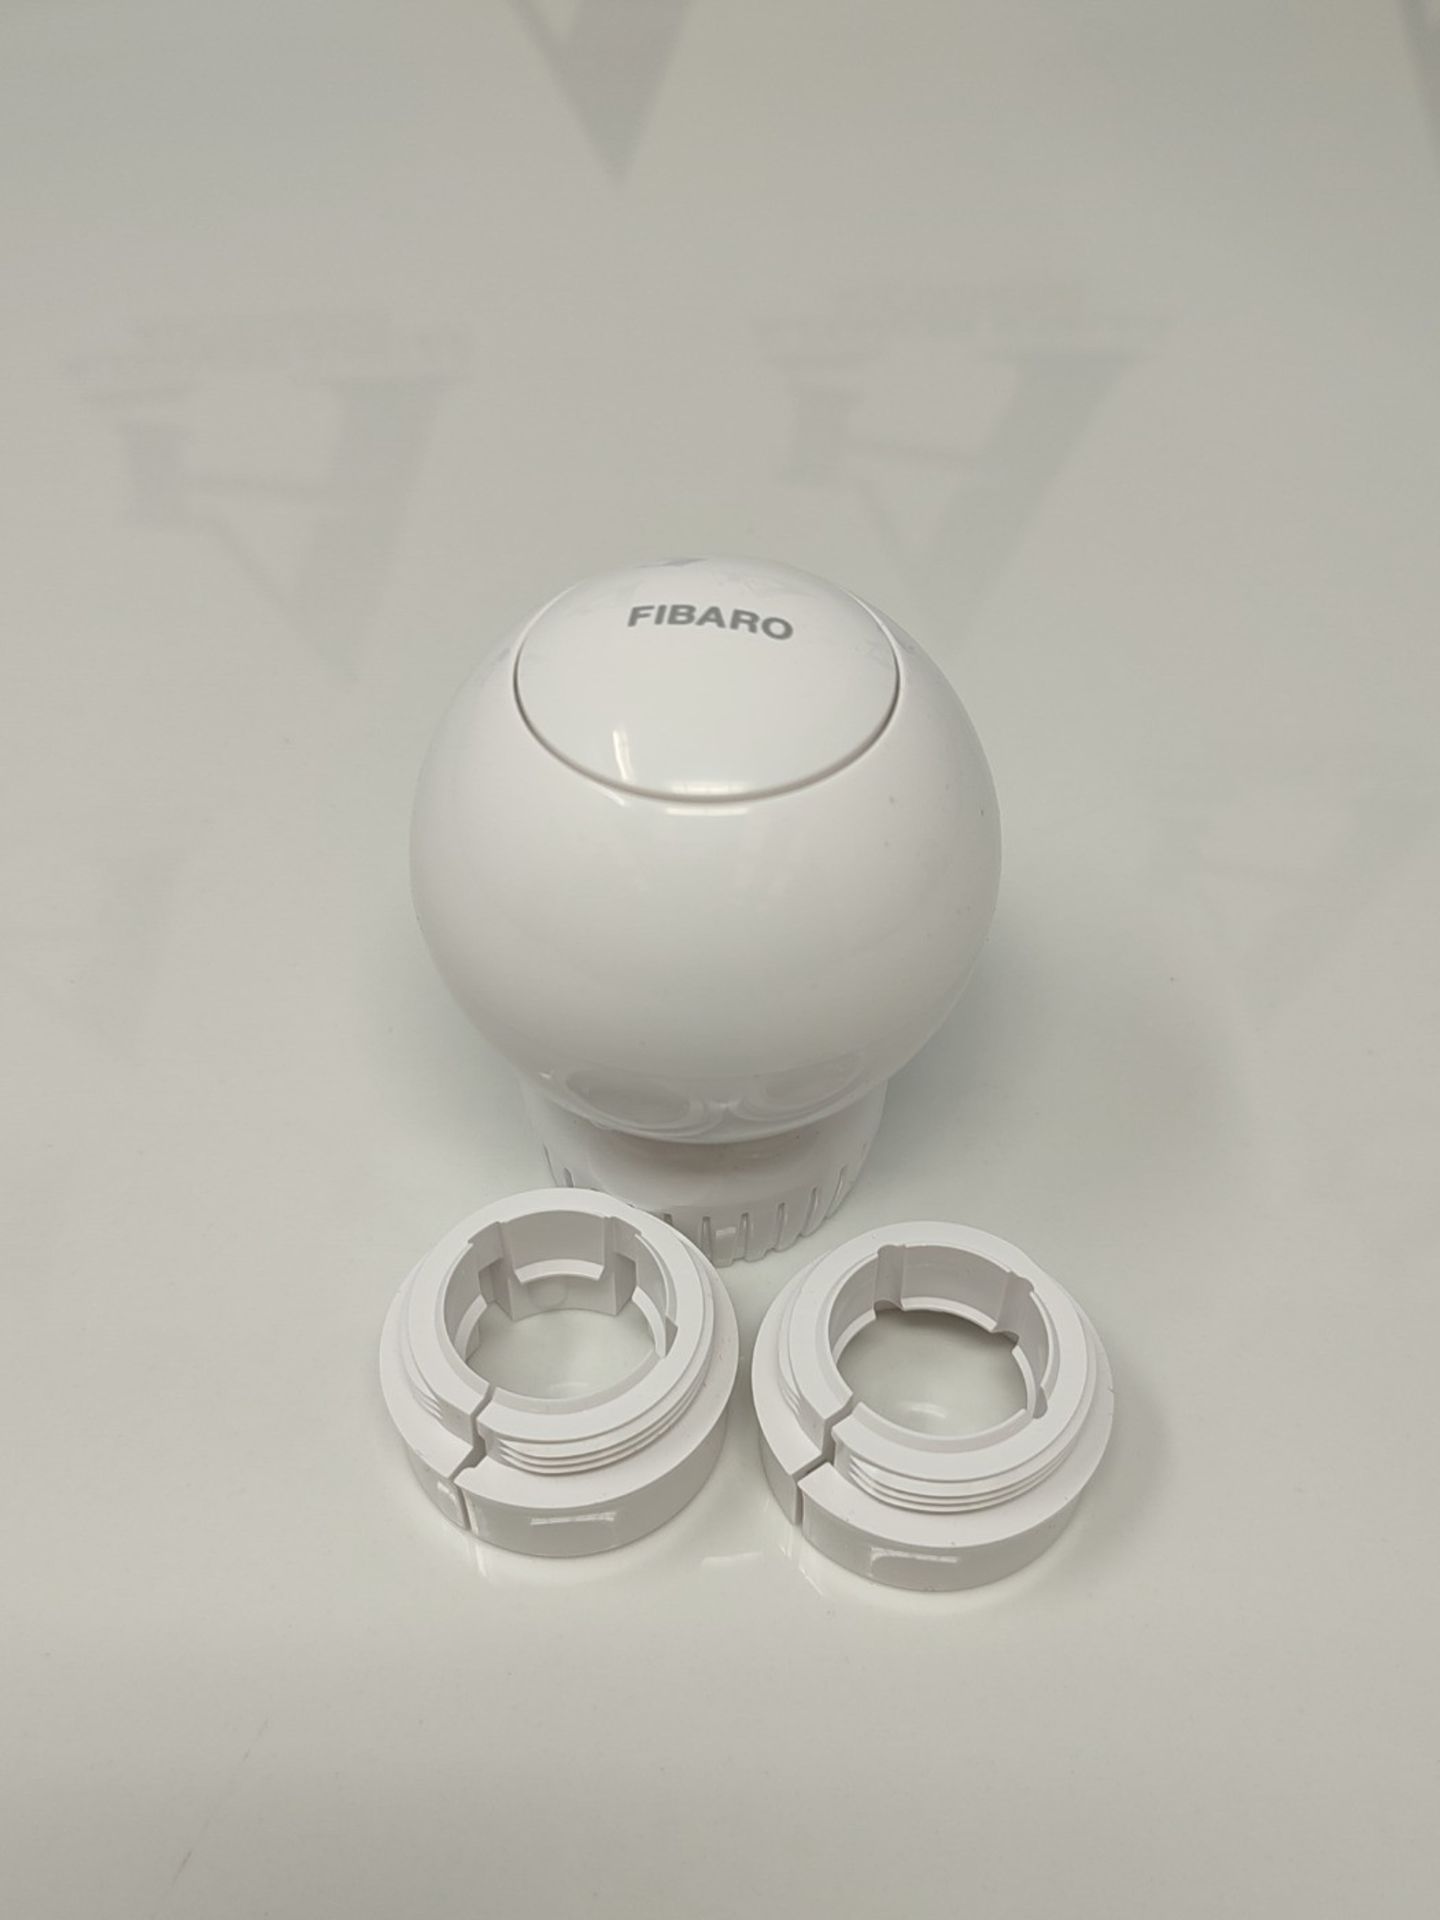 RRP £80.00 FIBARO Heating Thermostat Head/Z-Wave Plus, radiator thermostat, FGT-001 - Image 3 of 3